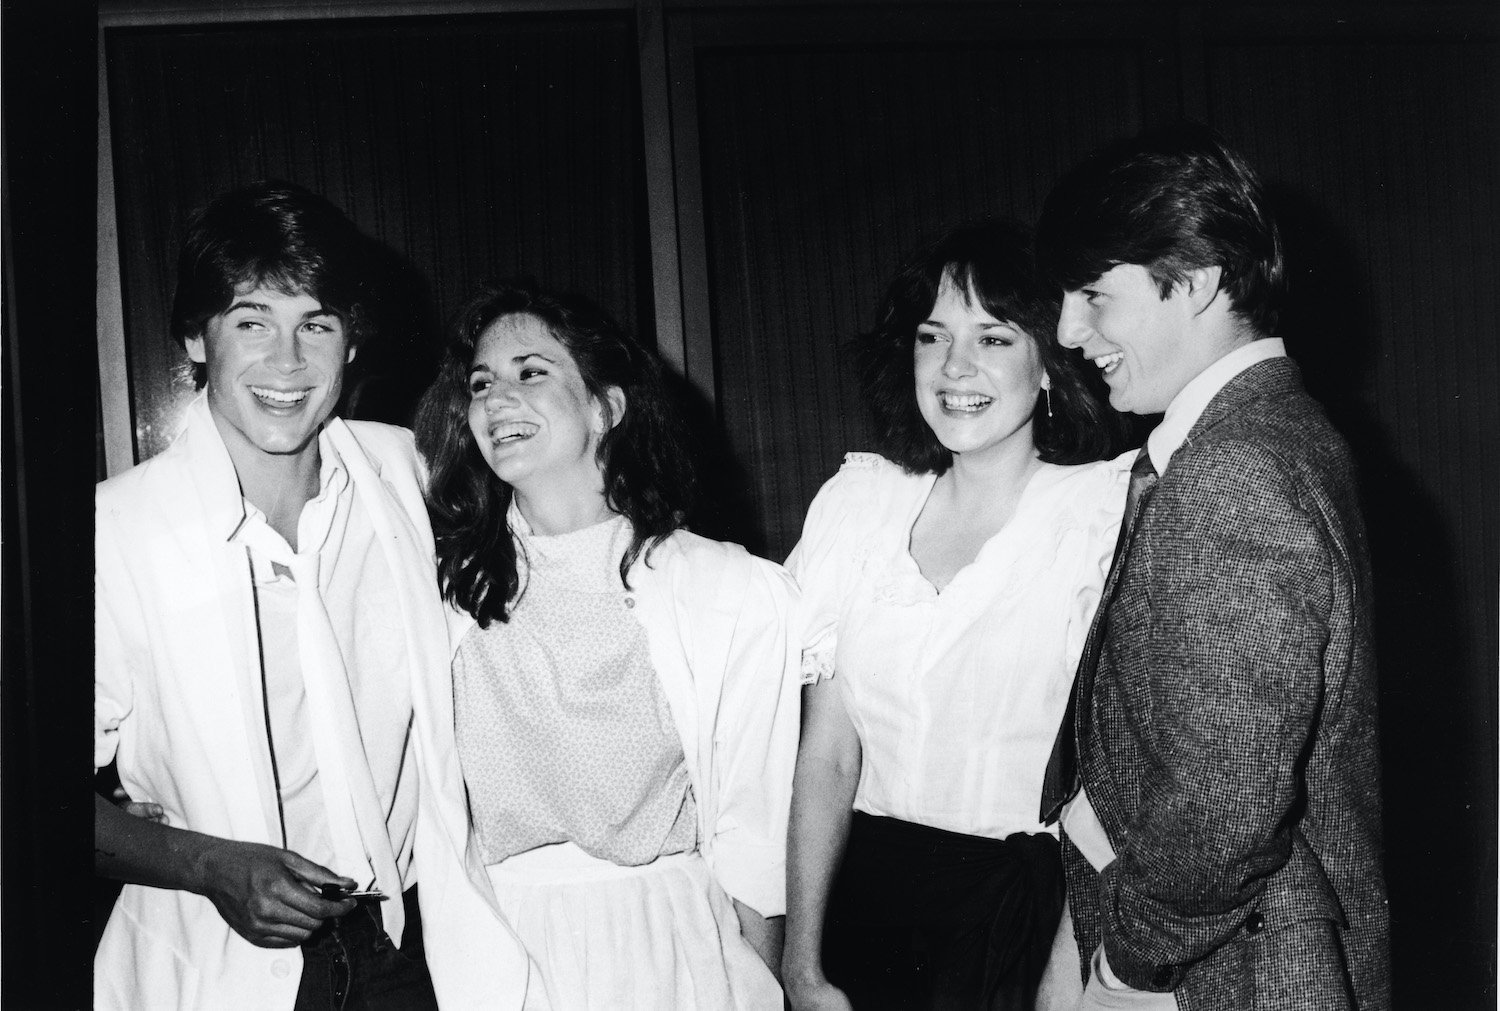 Rob Lowe, Melissa Gilbert, Michelle Meyrink, and Tom Cruise attend a screening of the telefilm 'In The Custody of Strangers' 1982 